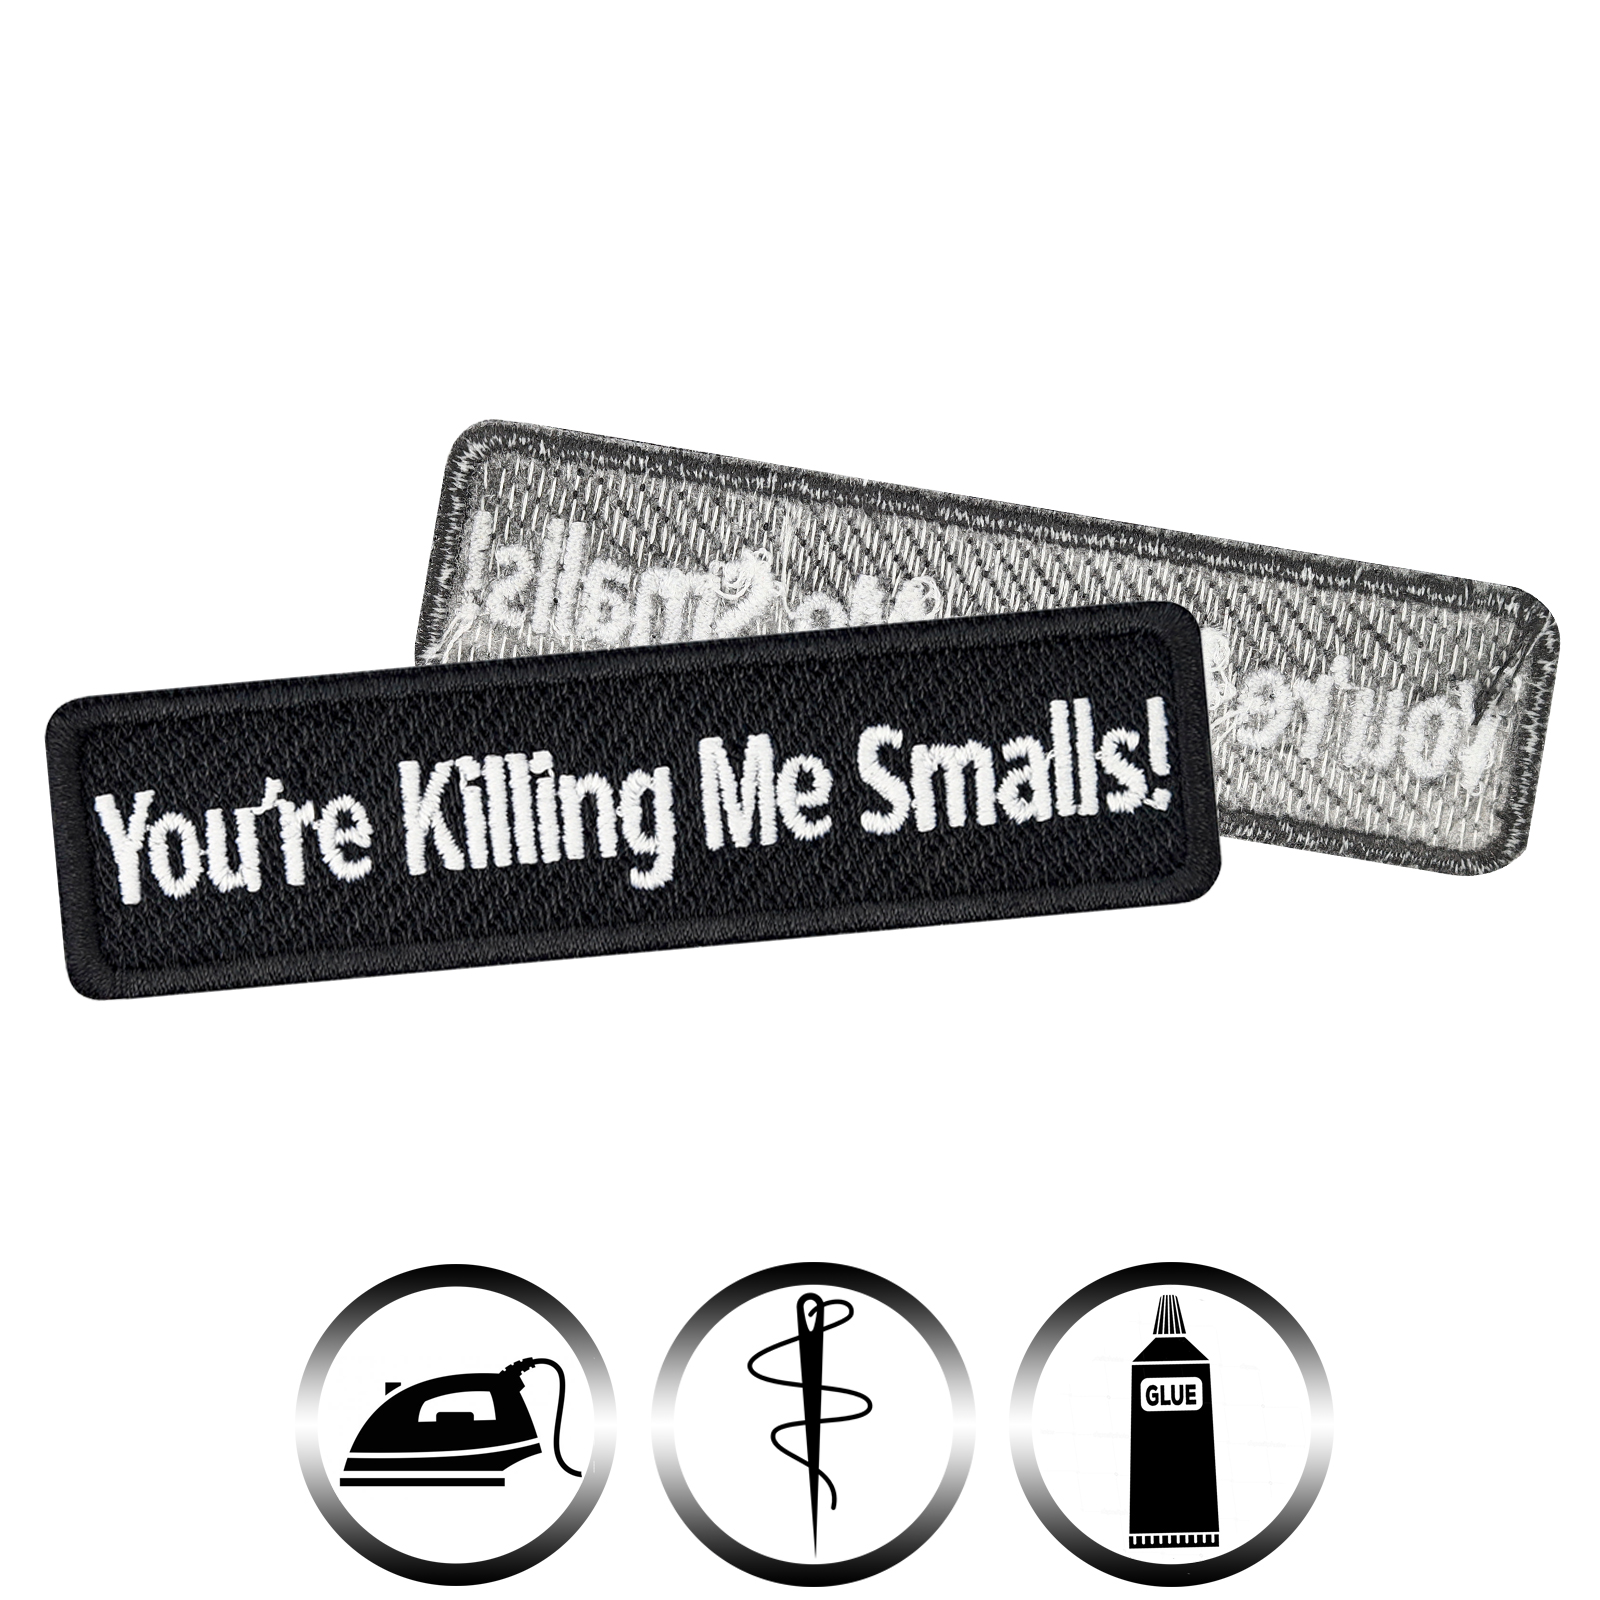 You´re killing me smalls! - Patch